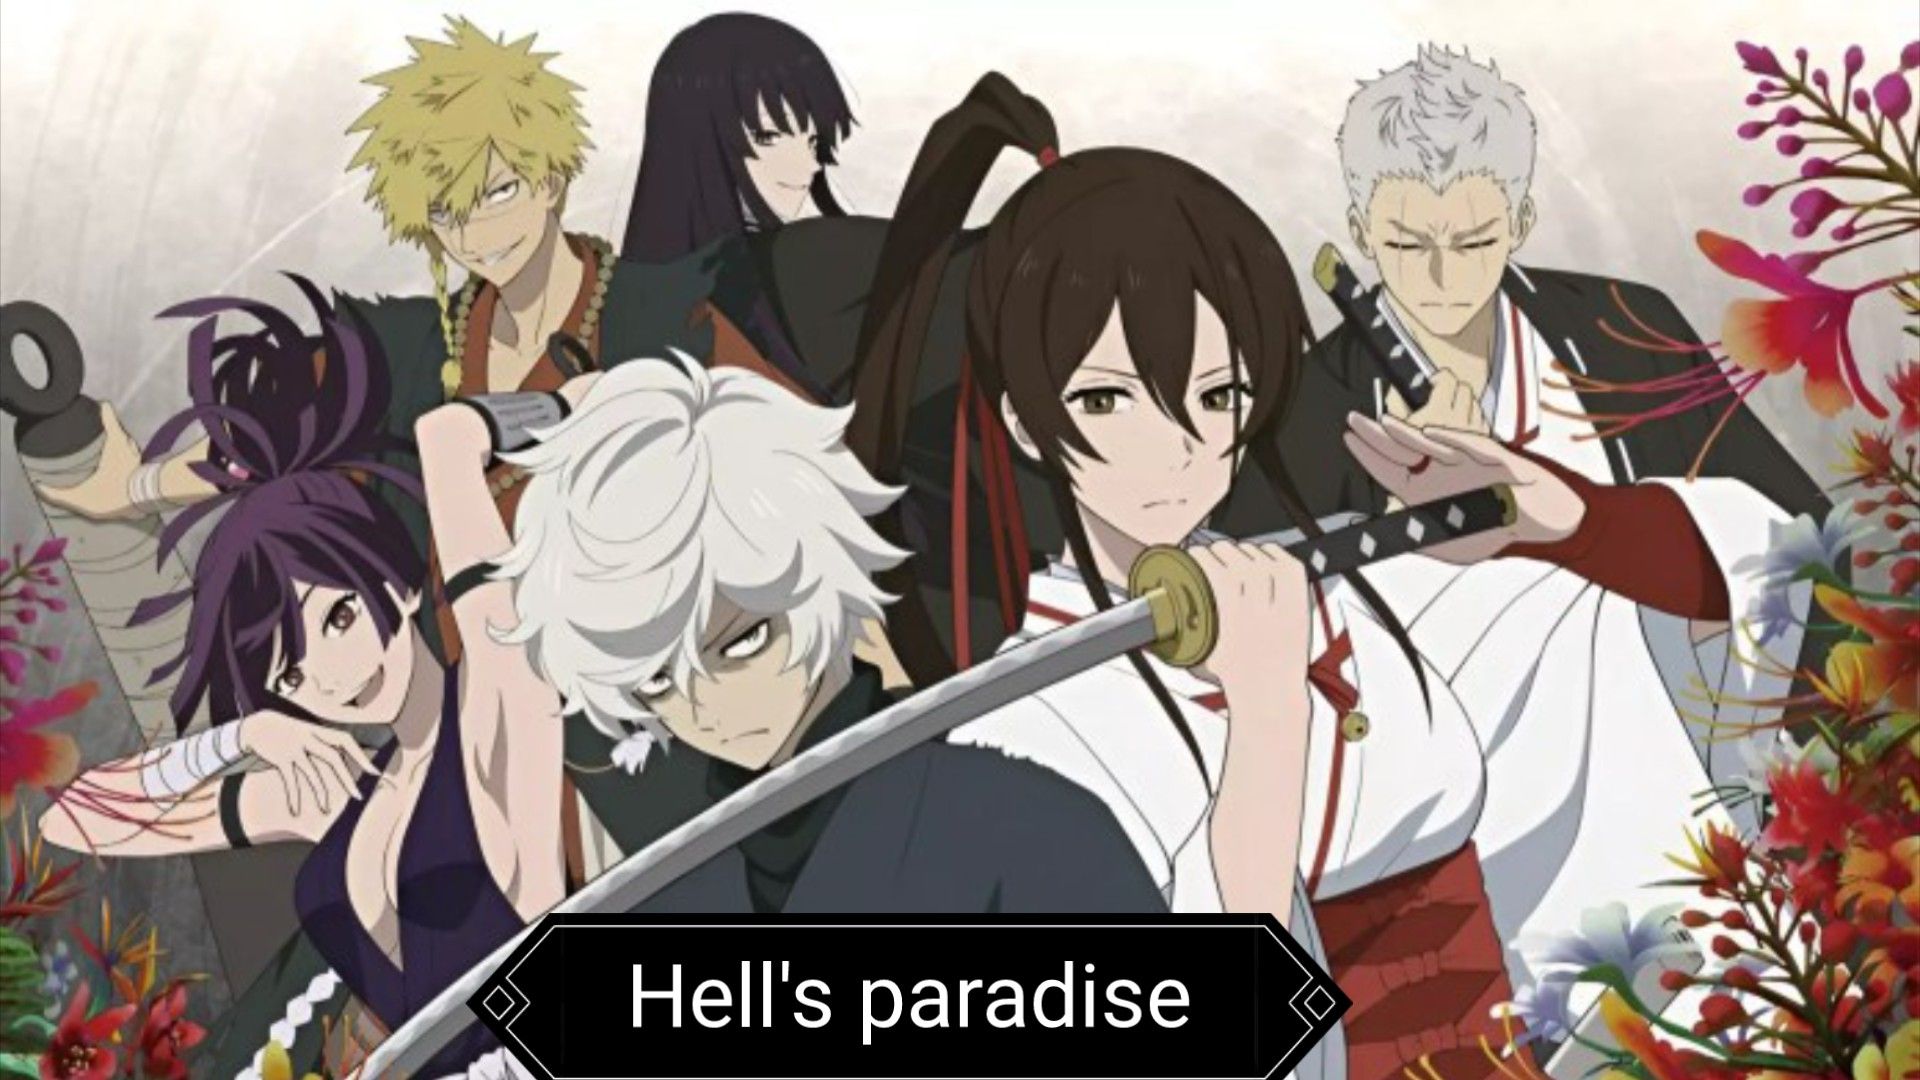 Hell's Paradise Episode 13 Explained in Hindi